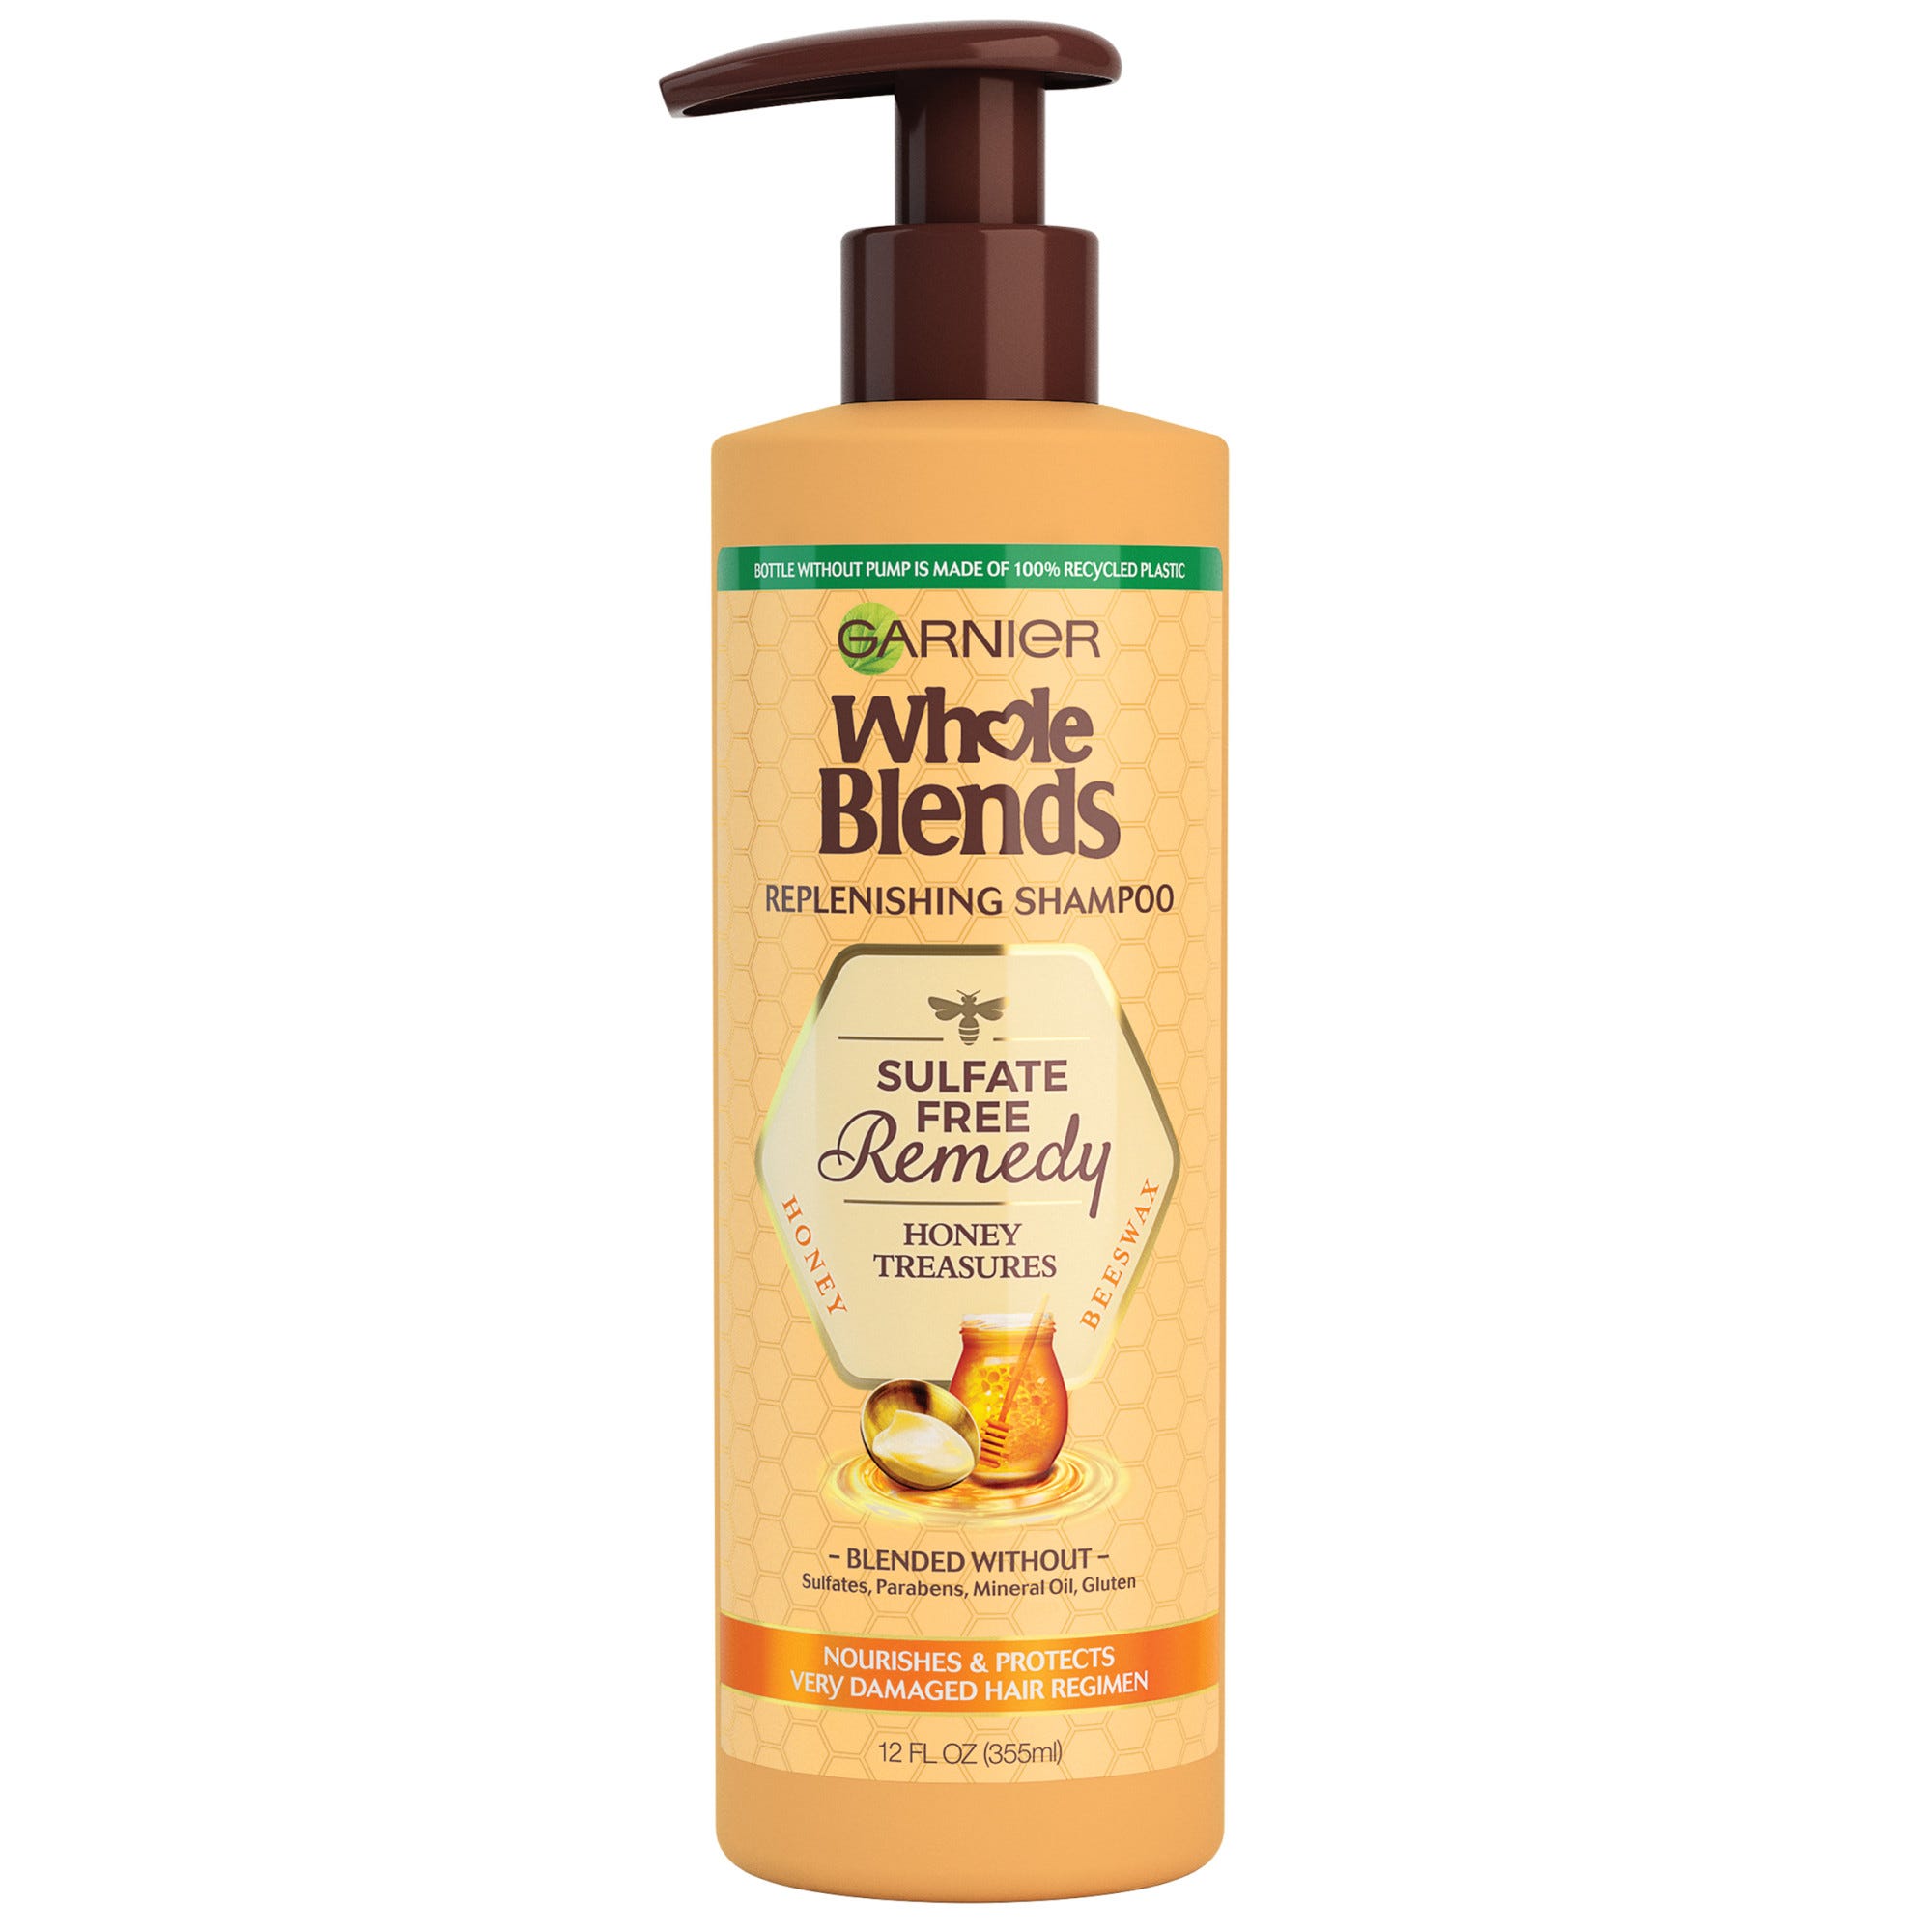 Garnier Whole Blends Sulfate Free Remedy Honey Treasures Shampoo for Dry to Very Dry Hair - 12 fl oz